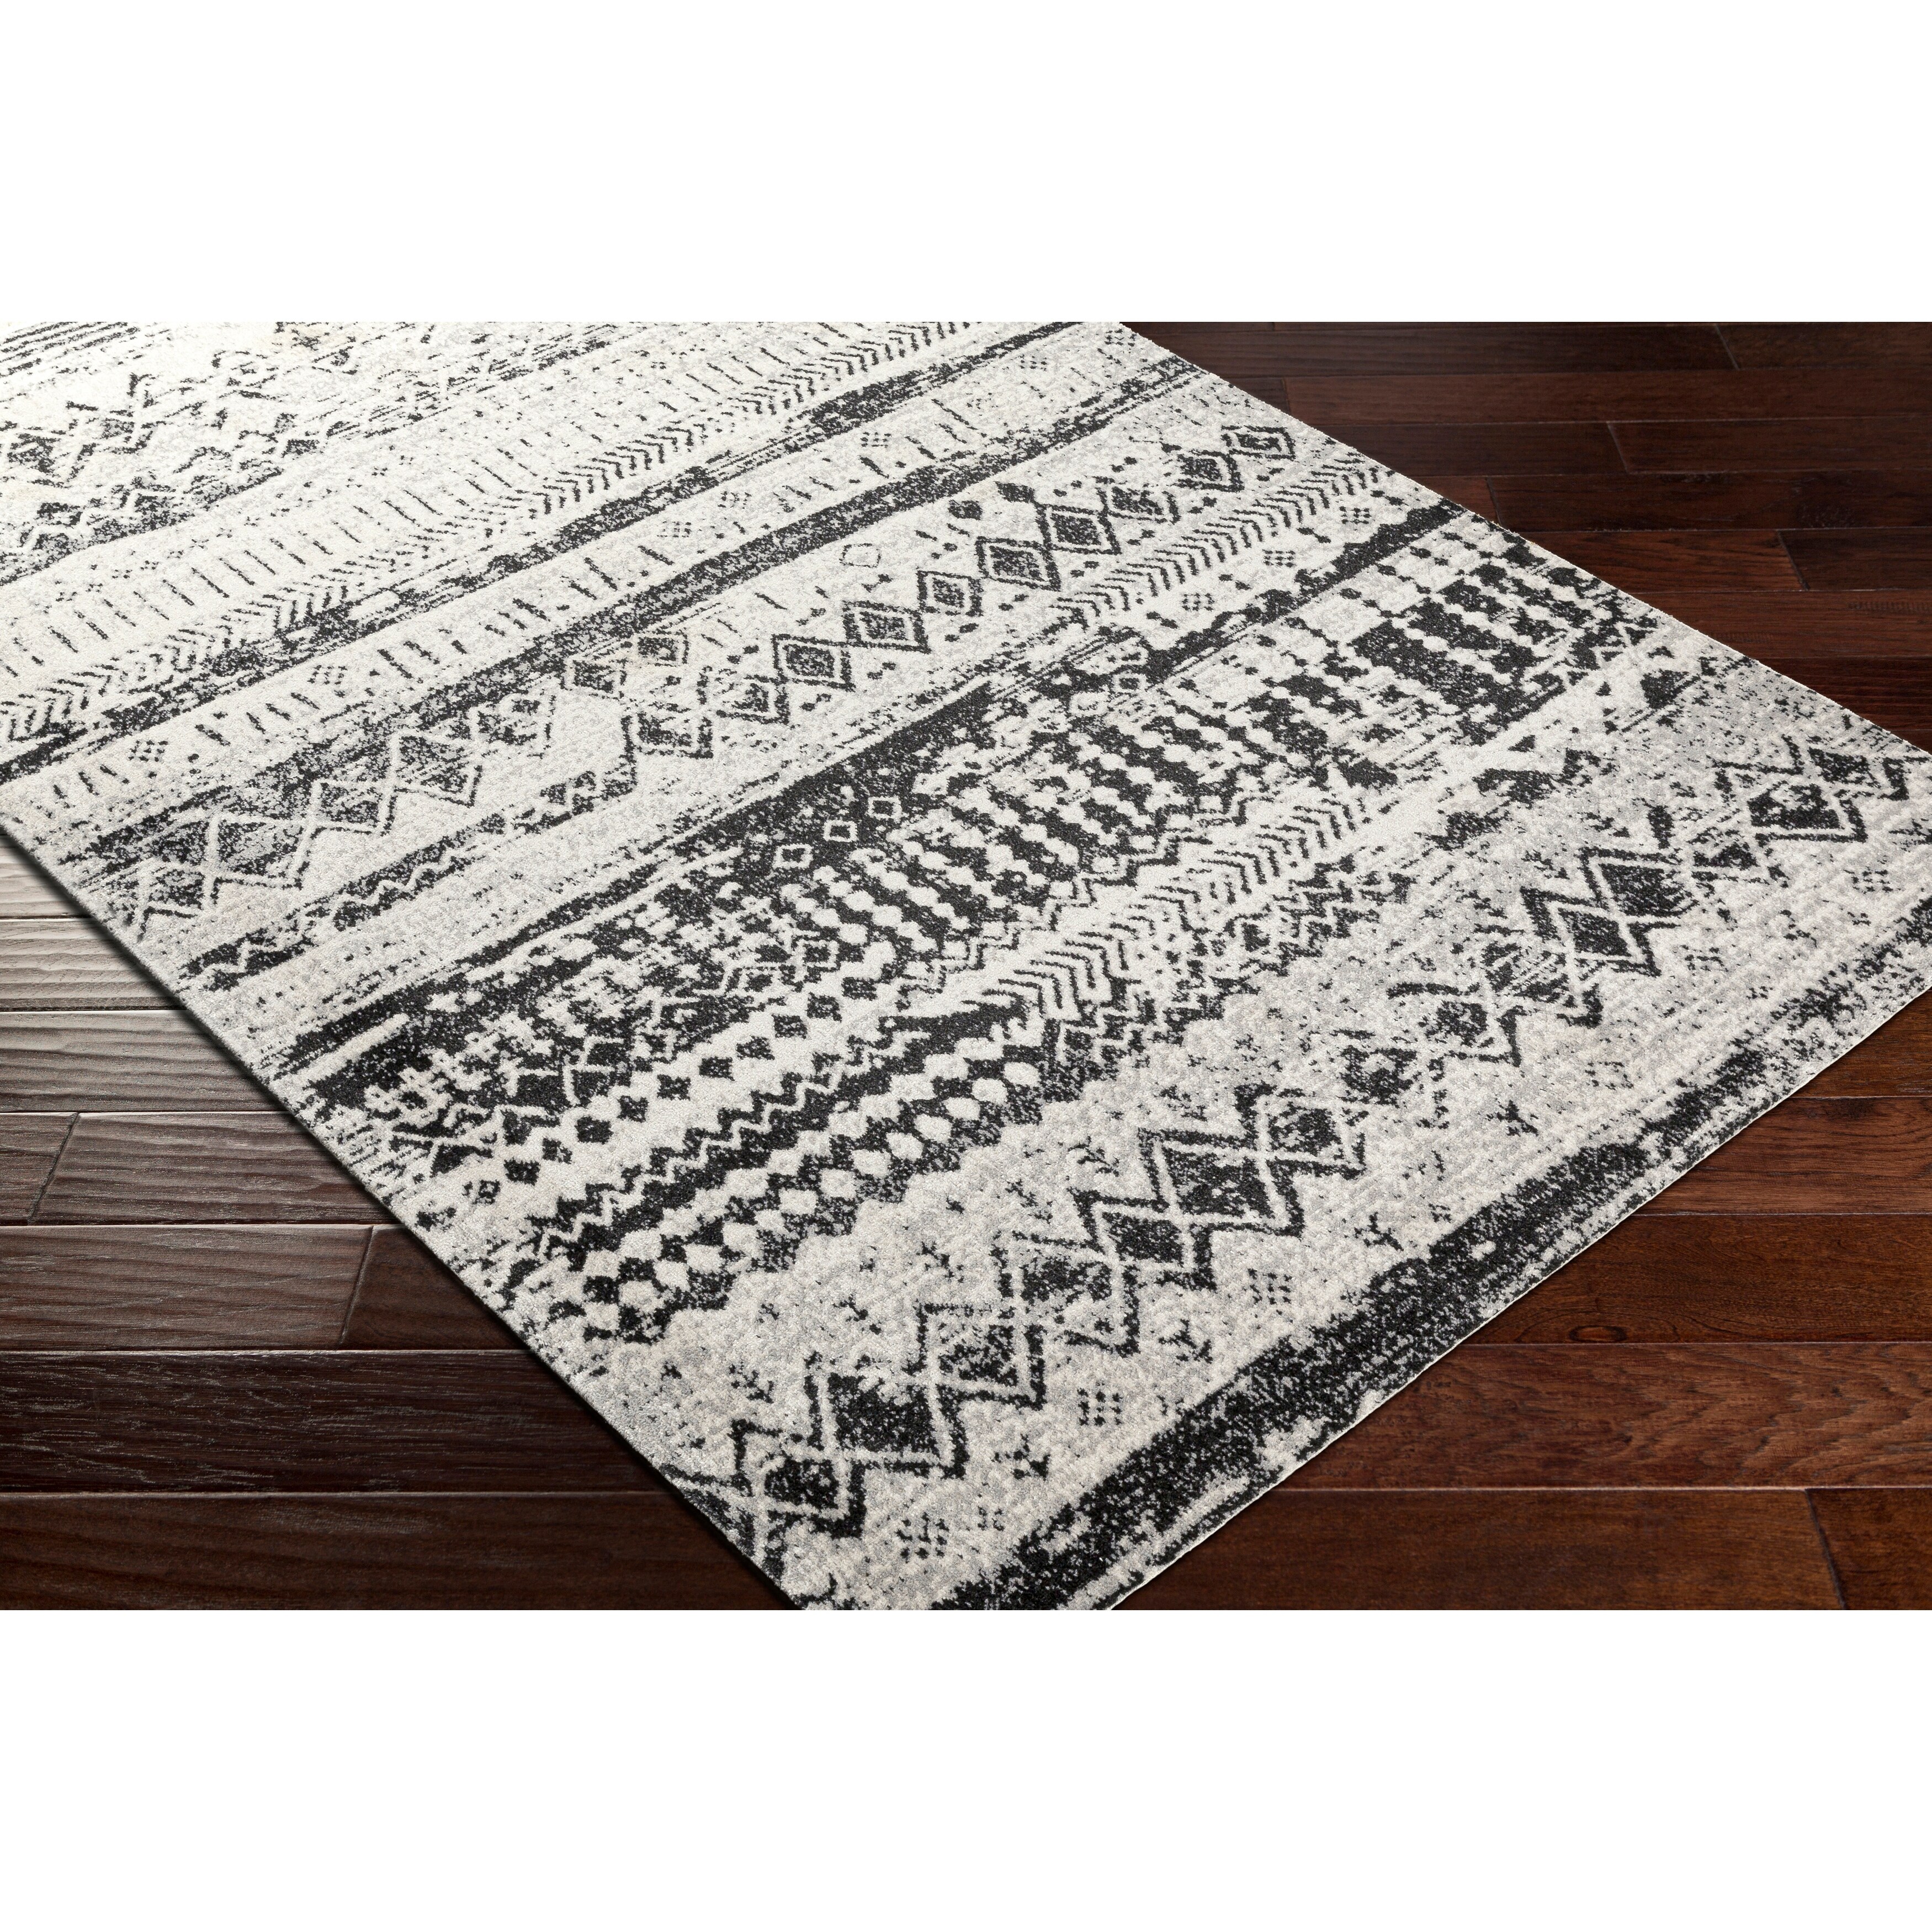 https://ak1.ostkcdn.com/images/products/is/images/direct/dcb3c916925db85058d02dcef5a921202e6c074c/Trina-Bohemian-Machine-Washable-Area-Rug.jpg